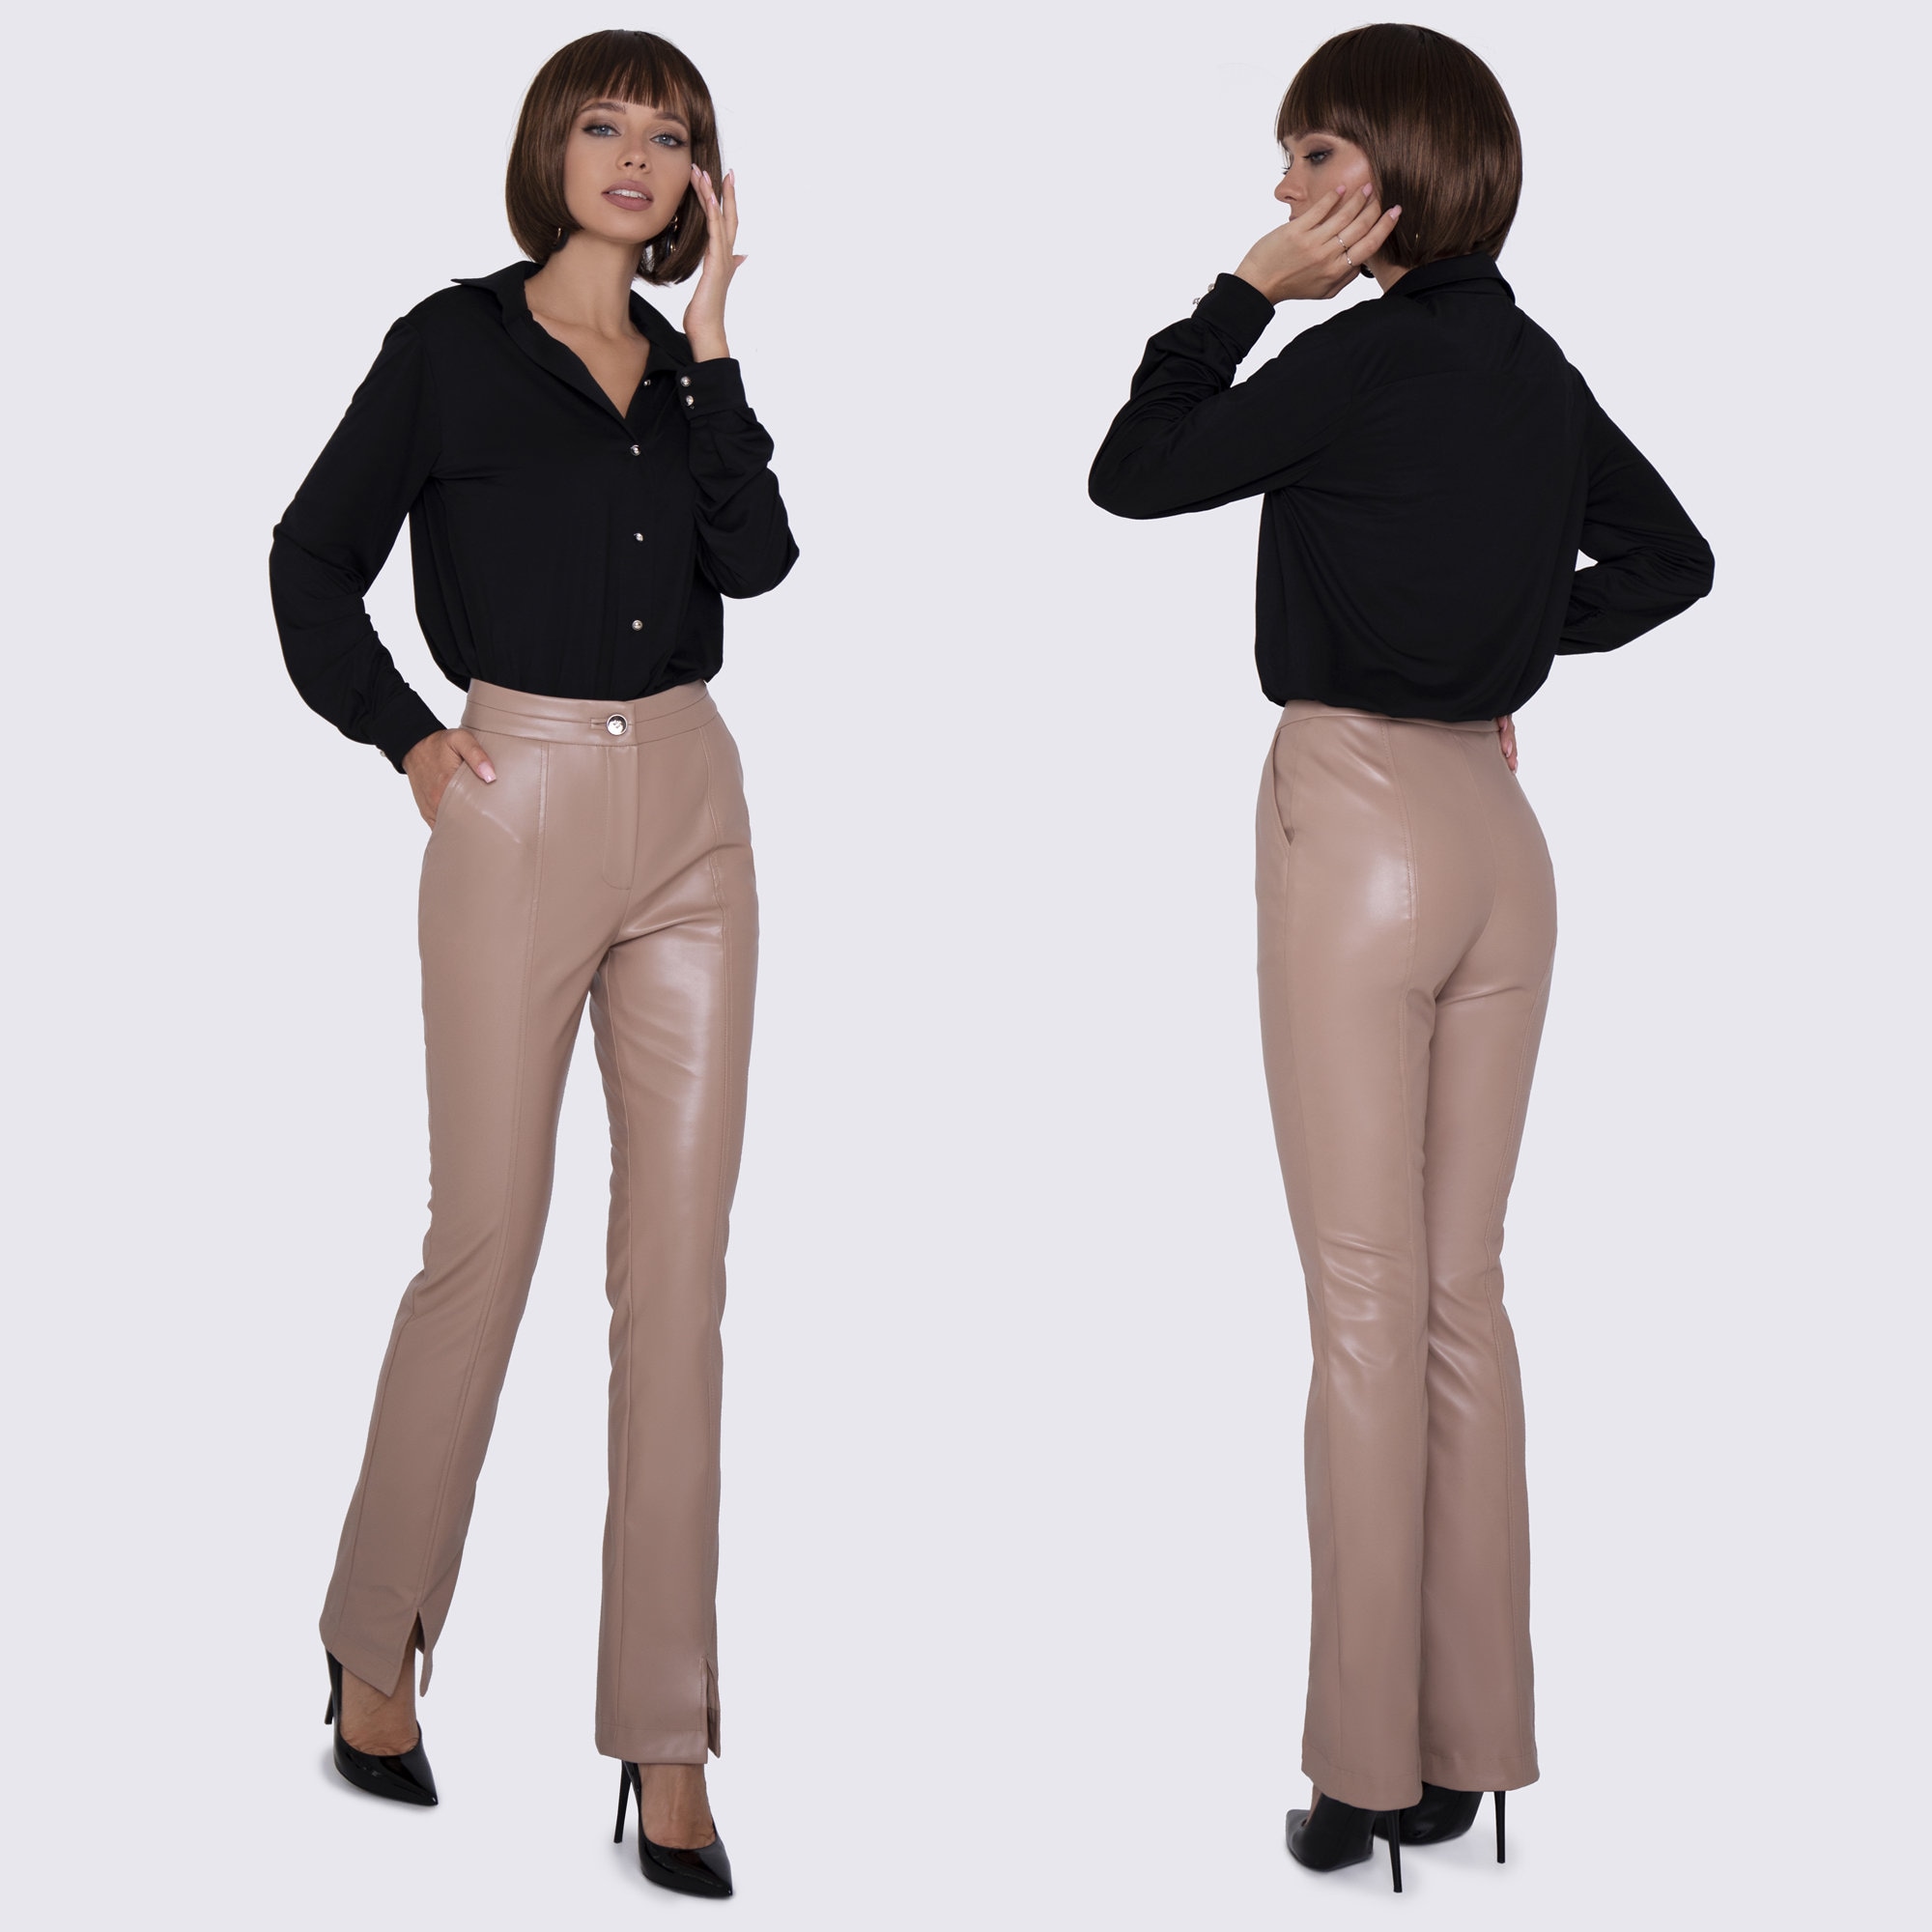 Women's Beige Leather Pants, Leather Trousers With Cotton Lining